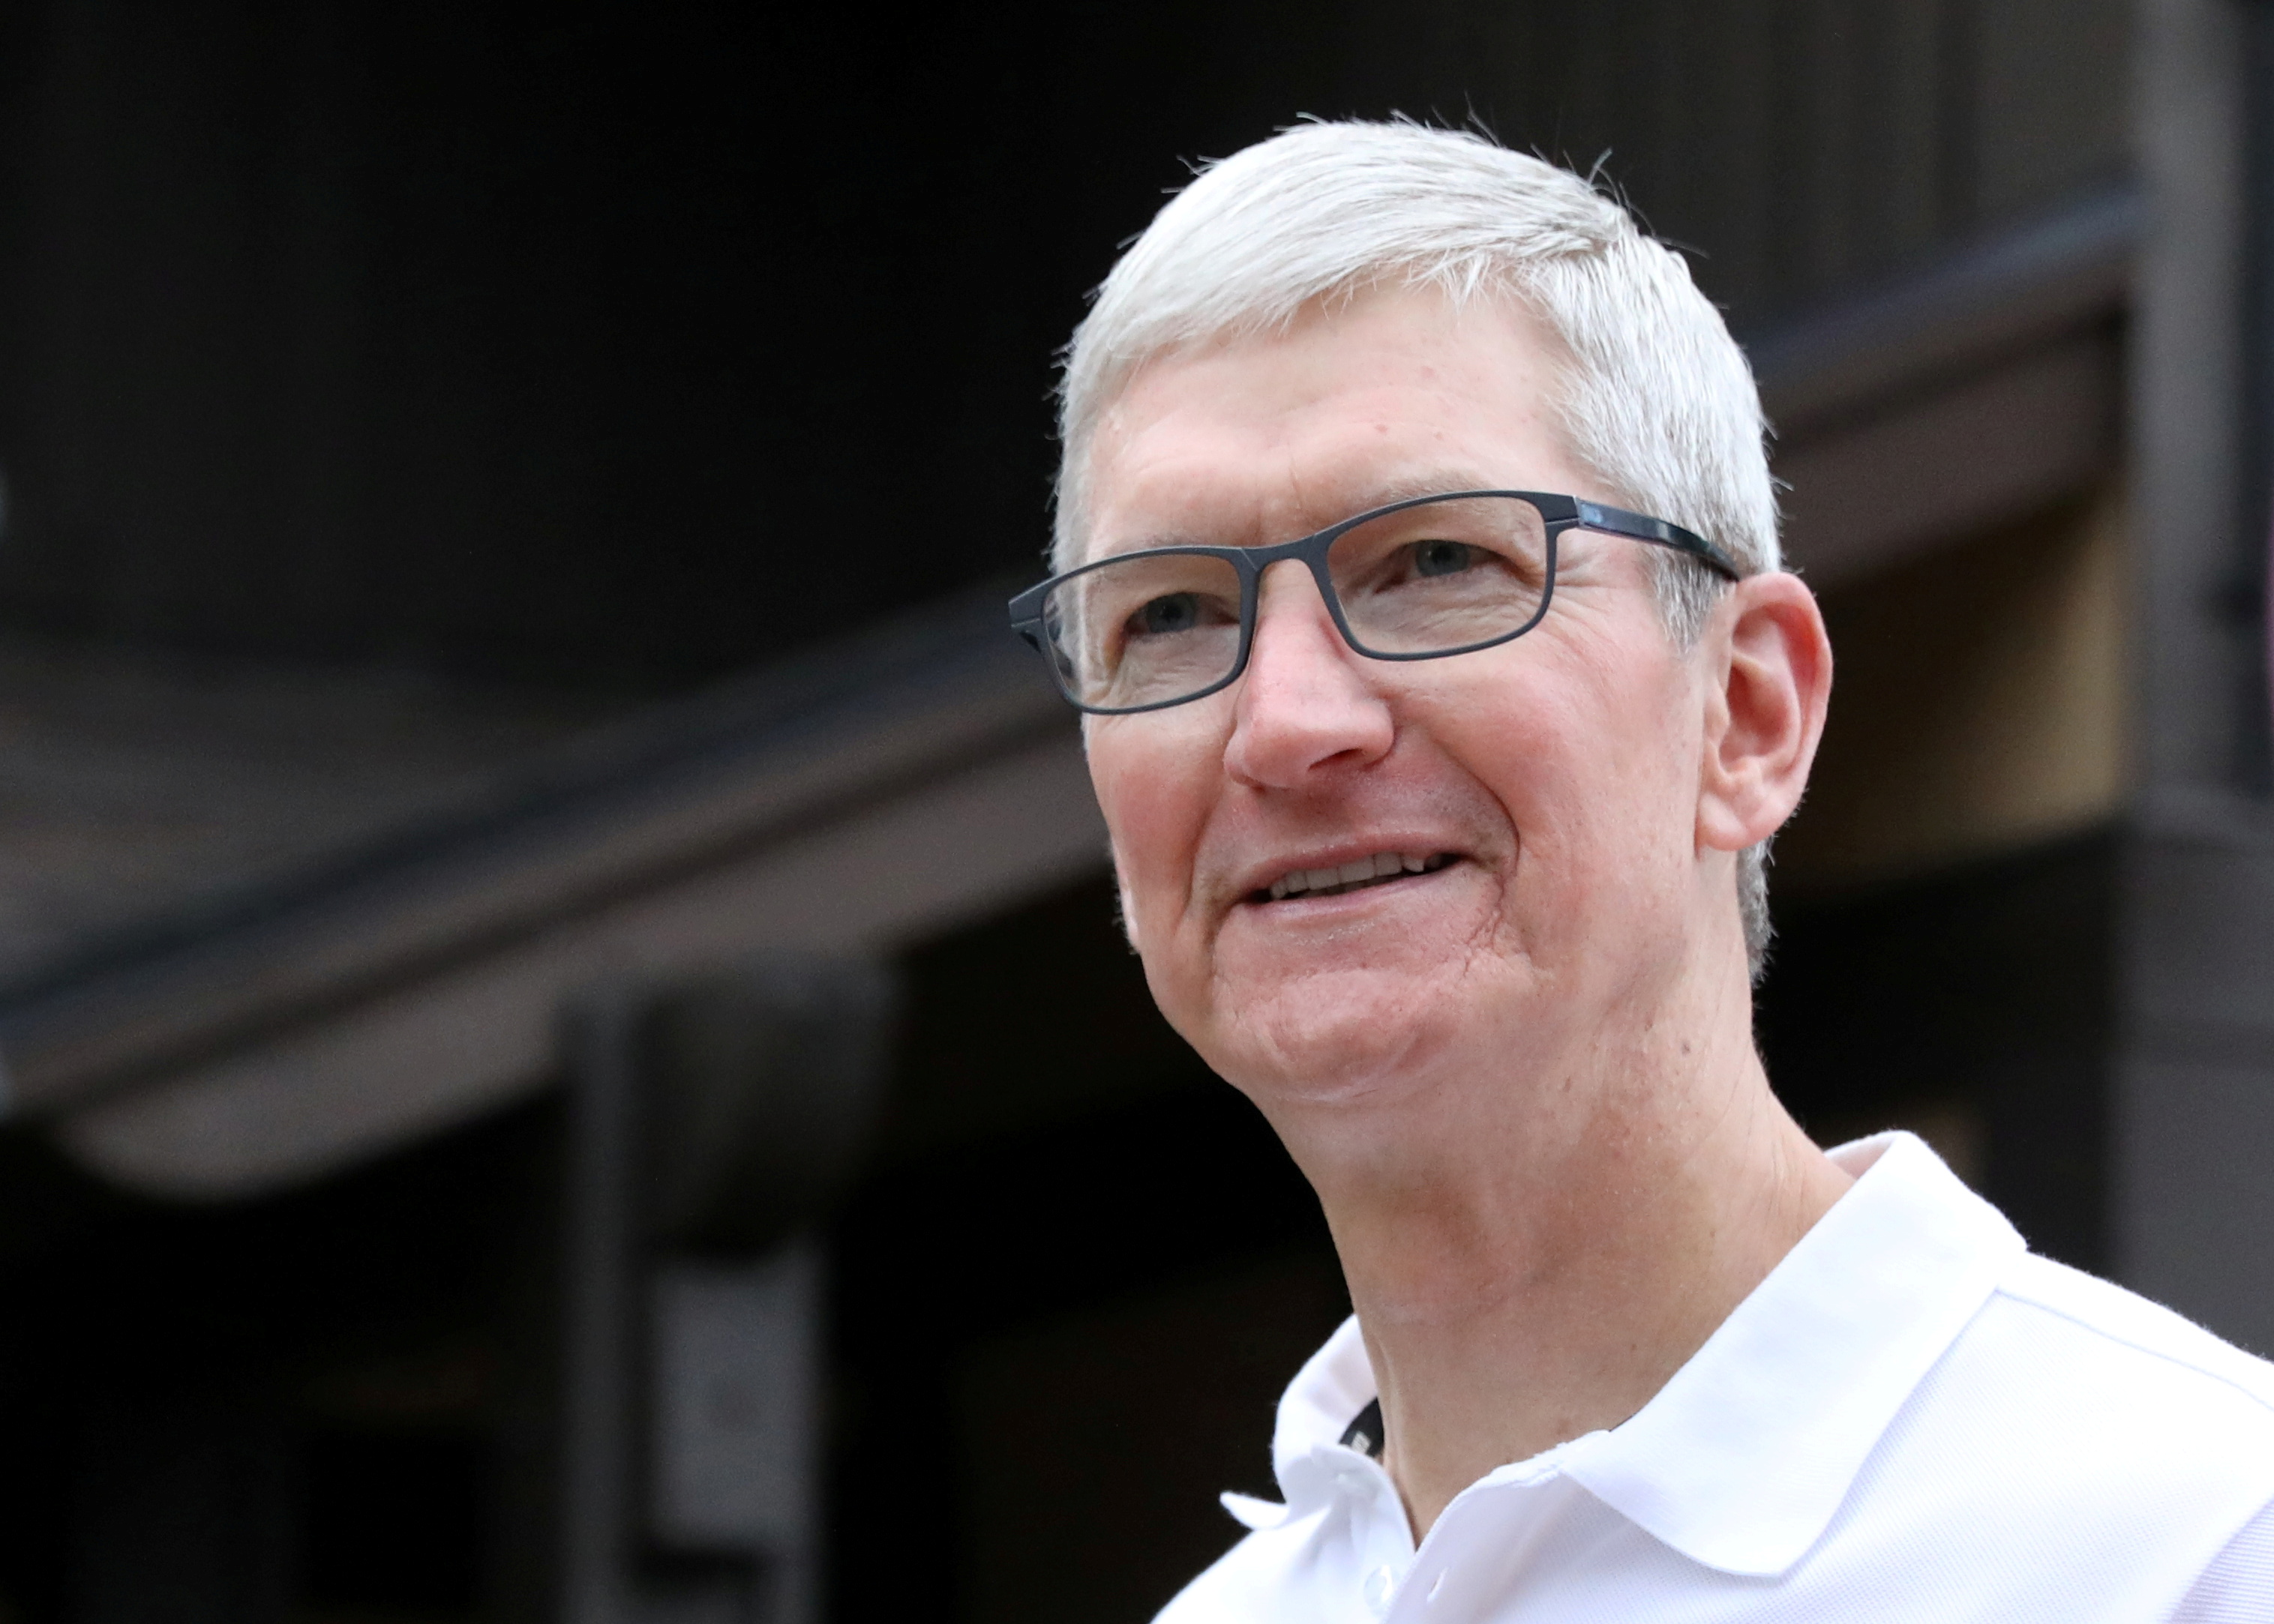 Tim Cook, CEO of Apple, attends the annual Allen and Co. Sun Valley media conference in Sun Valley, Idaho